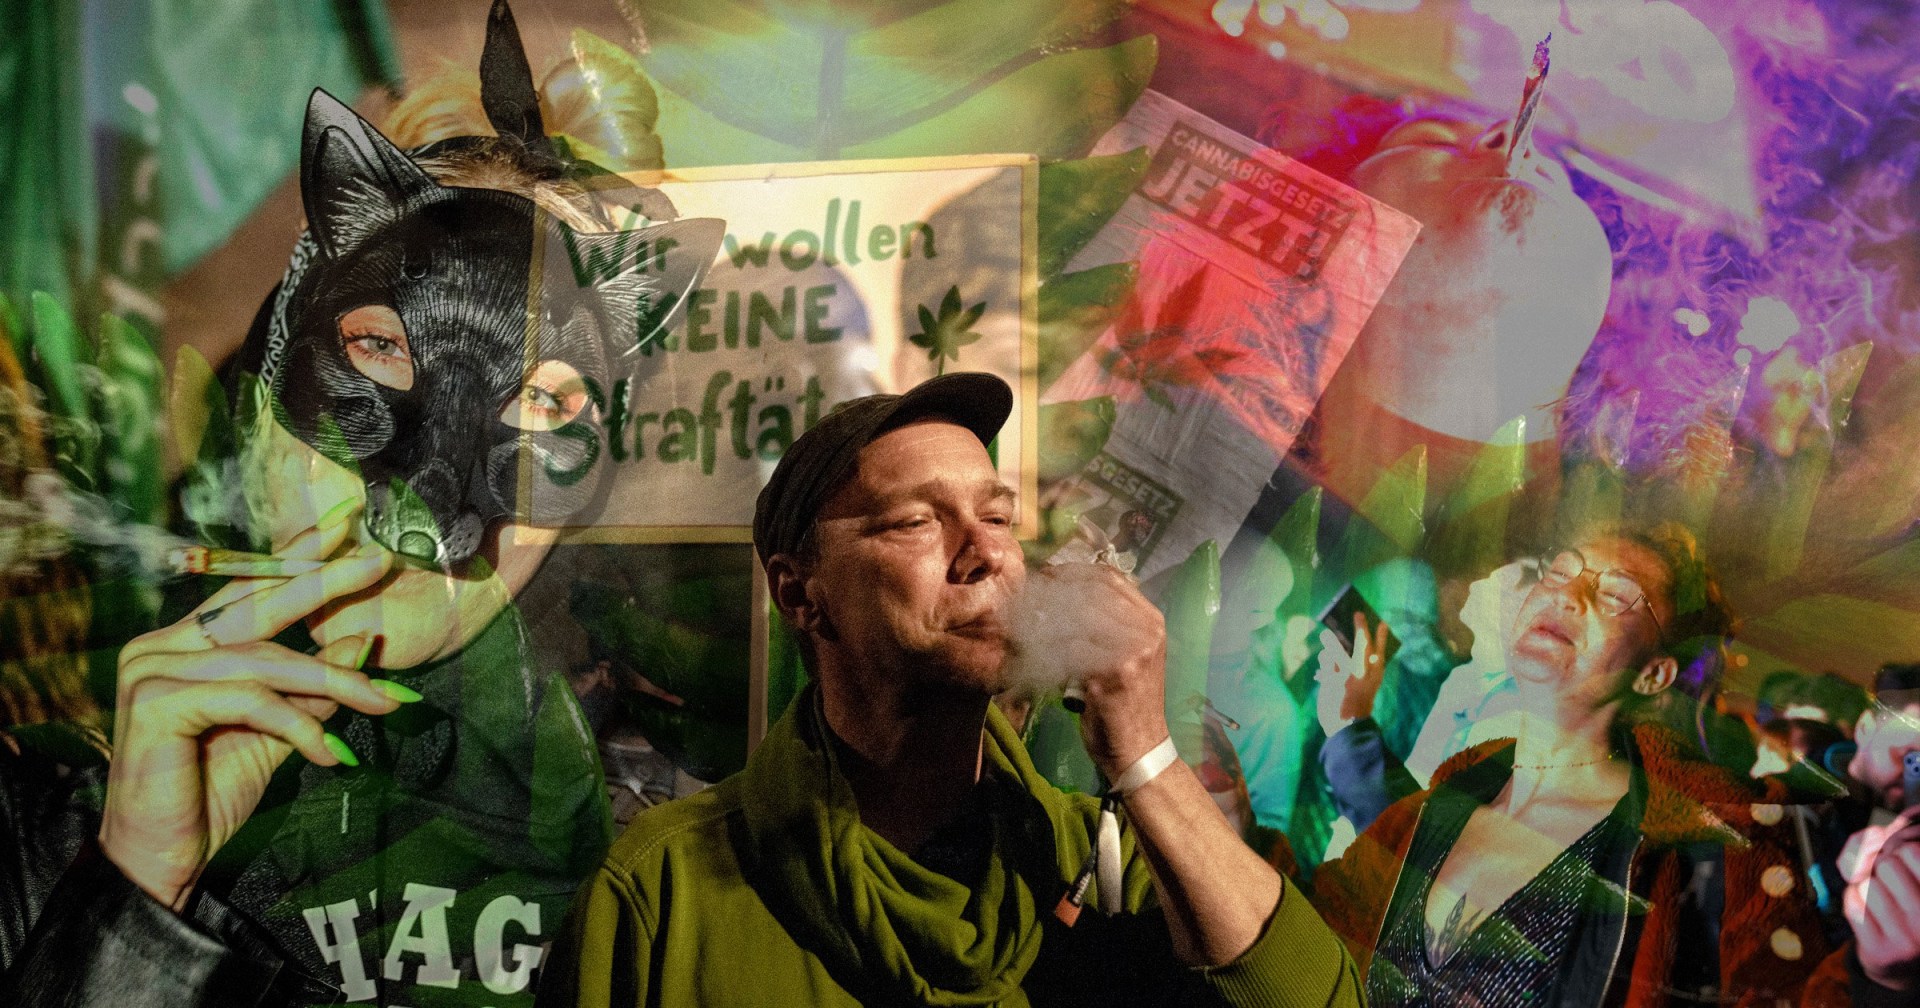 you can now grow and smoke cannabis in germany. what are the new rules?